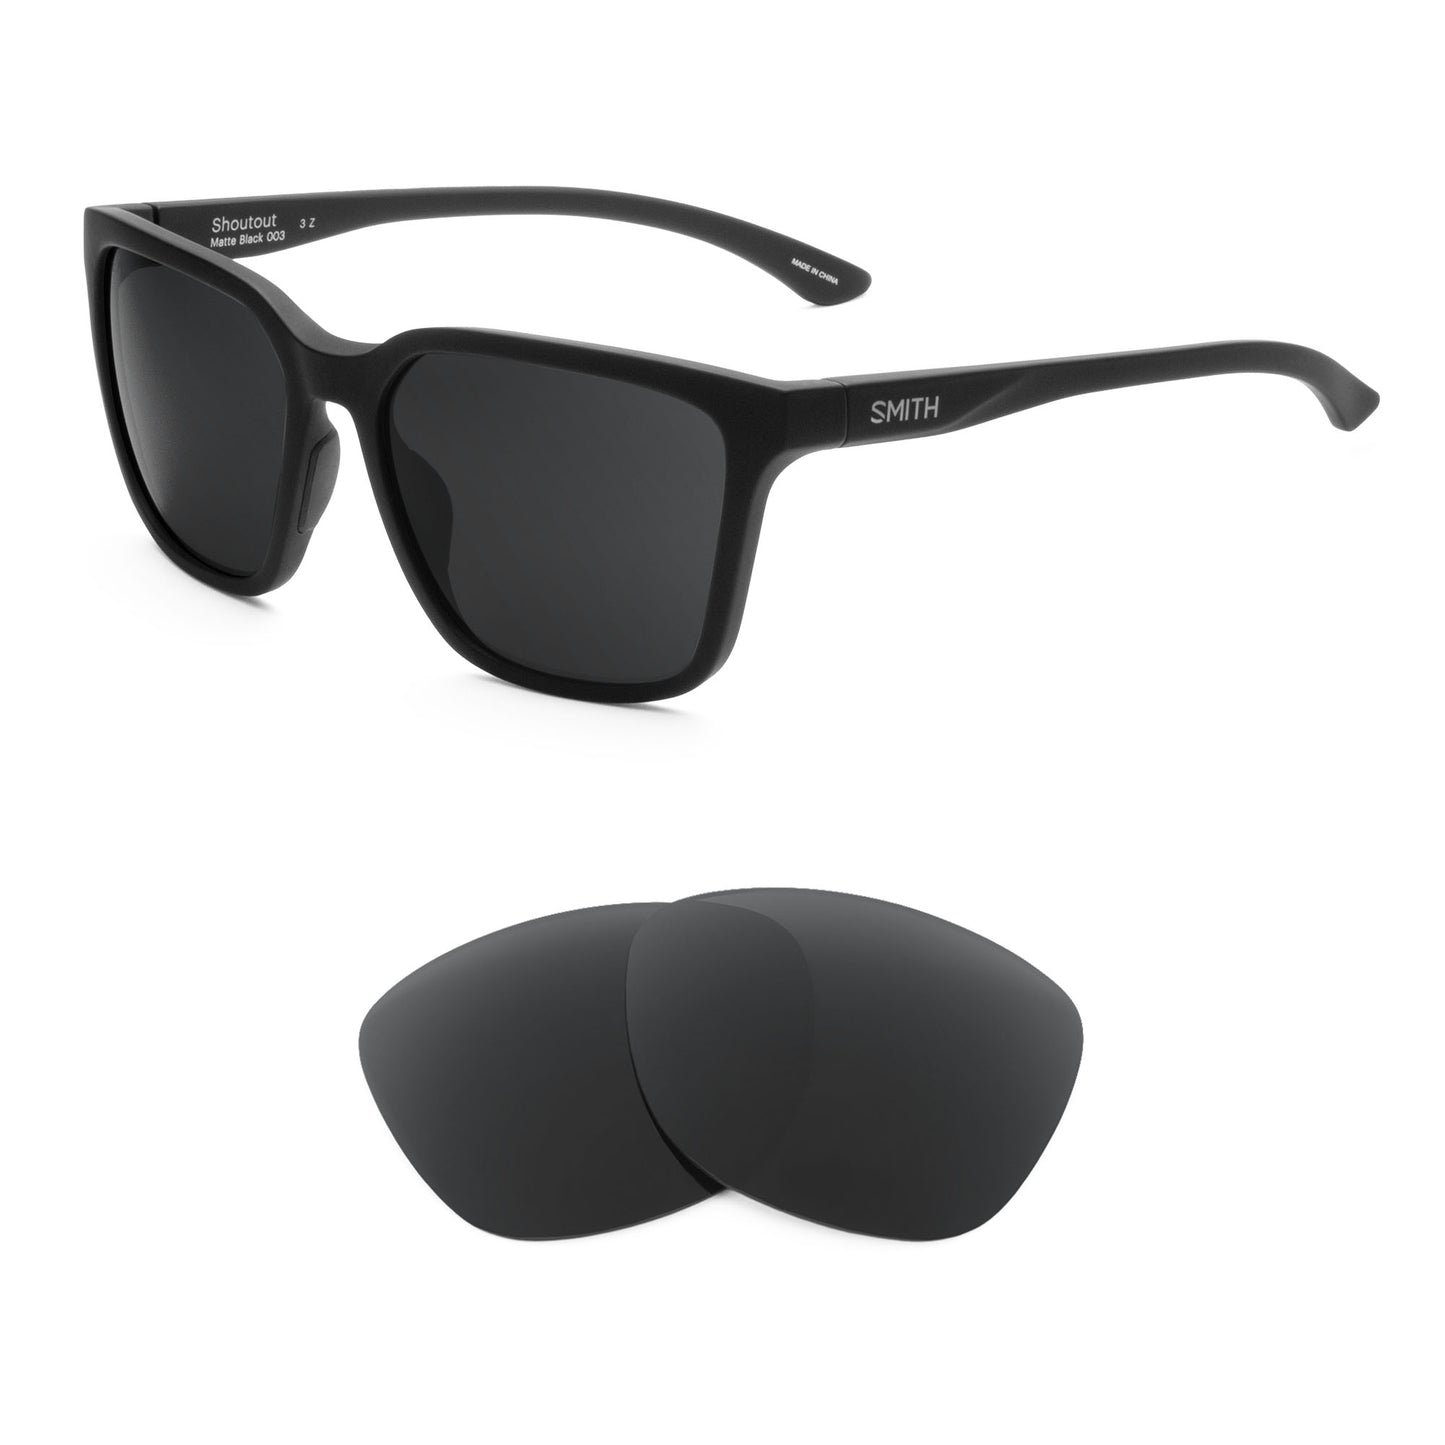 Smith Shoutout sunglasses with replacement lenses